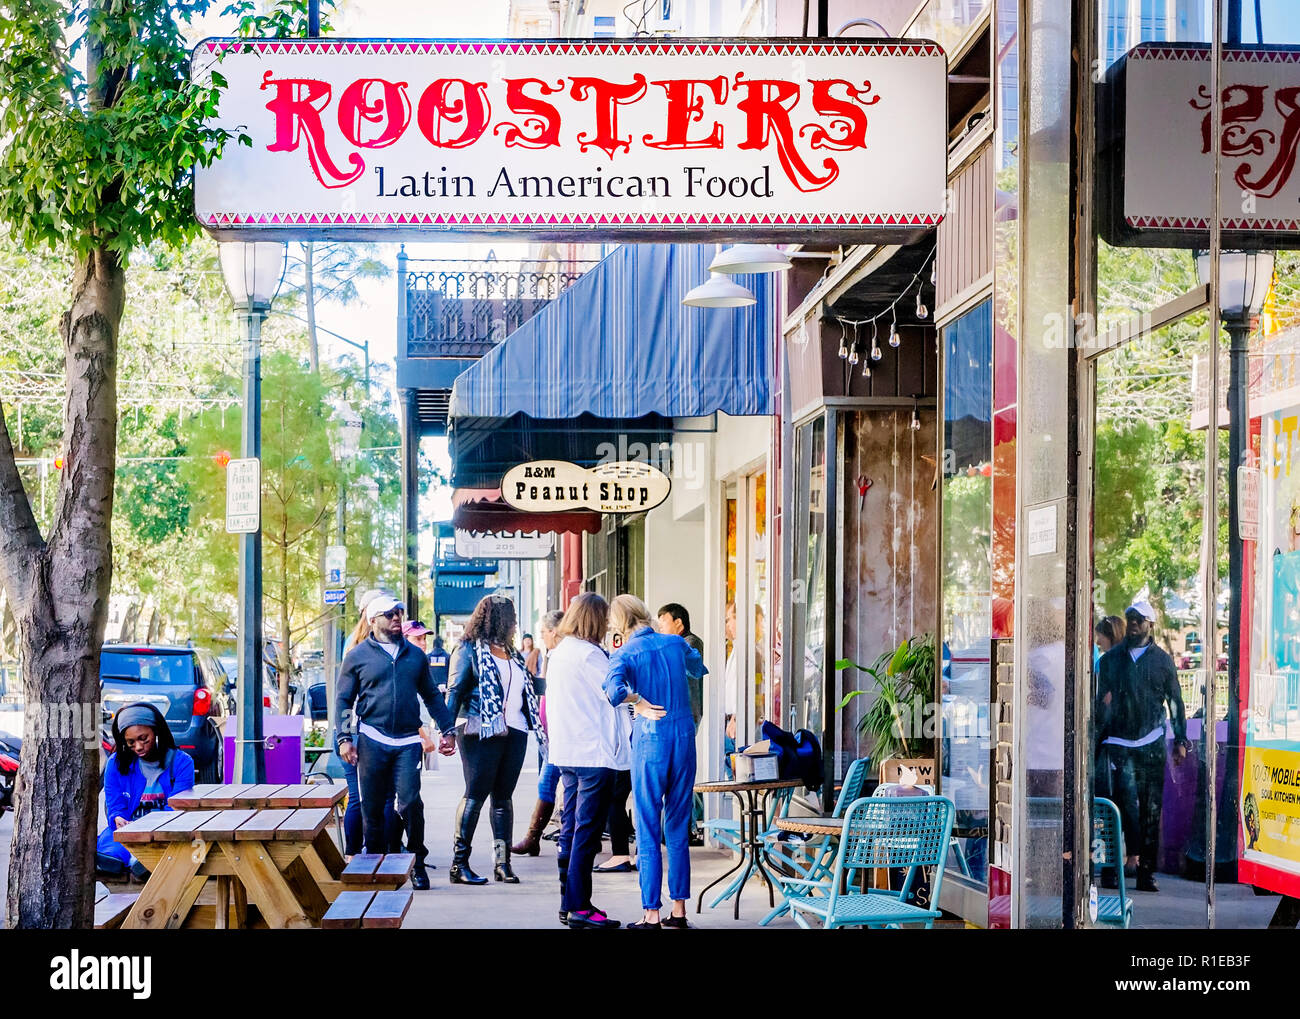 Tourists gather in front of Roosters Latin American Food and A&M Peanut Shop on Dauphin Street, Nov. 3, 2018, in Mobile, Alabama. Stock Photo